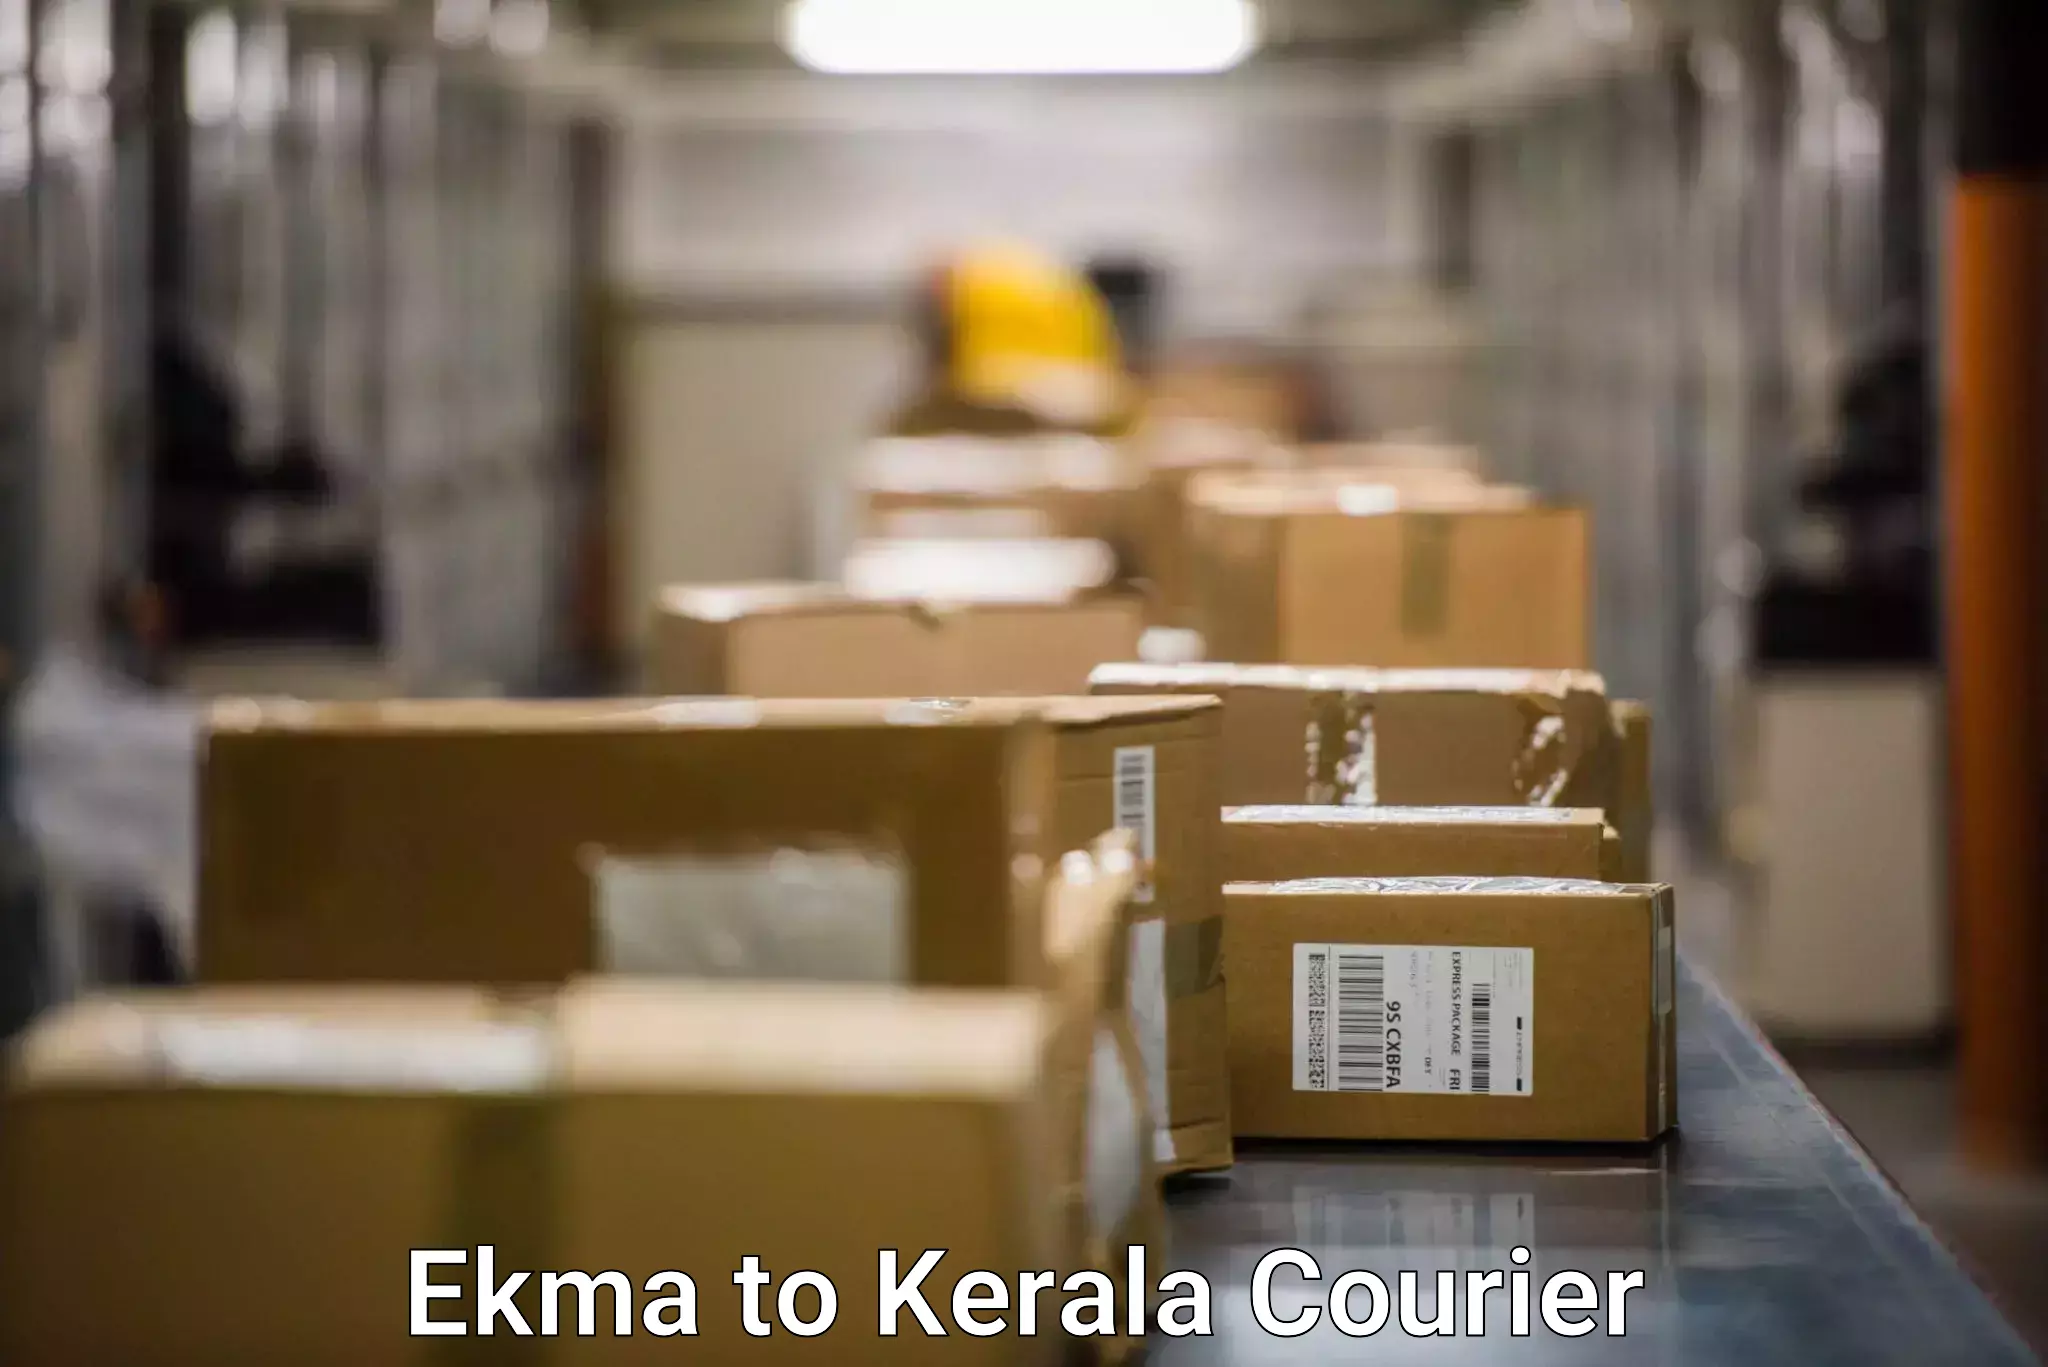 State-of-the-art courier technology in Ekma to Kerala